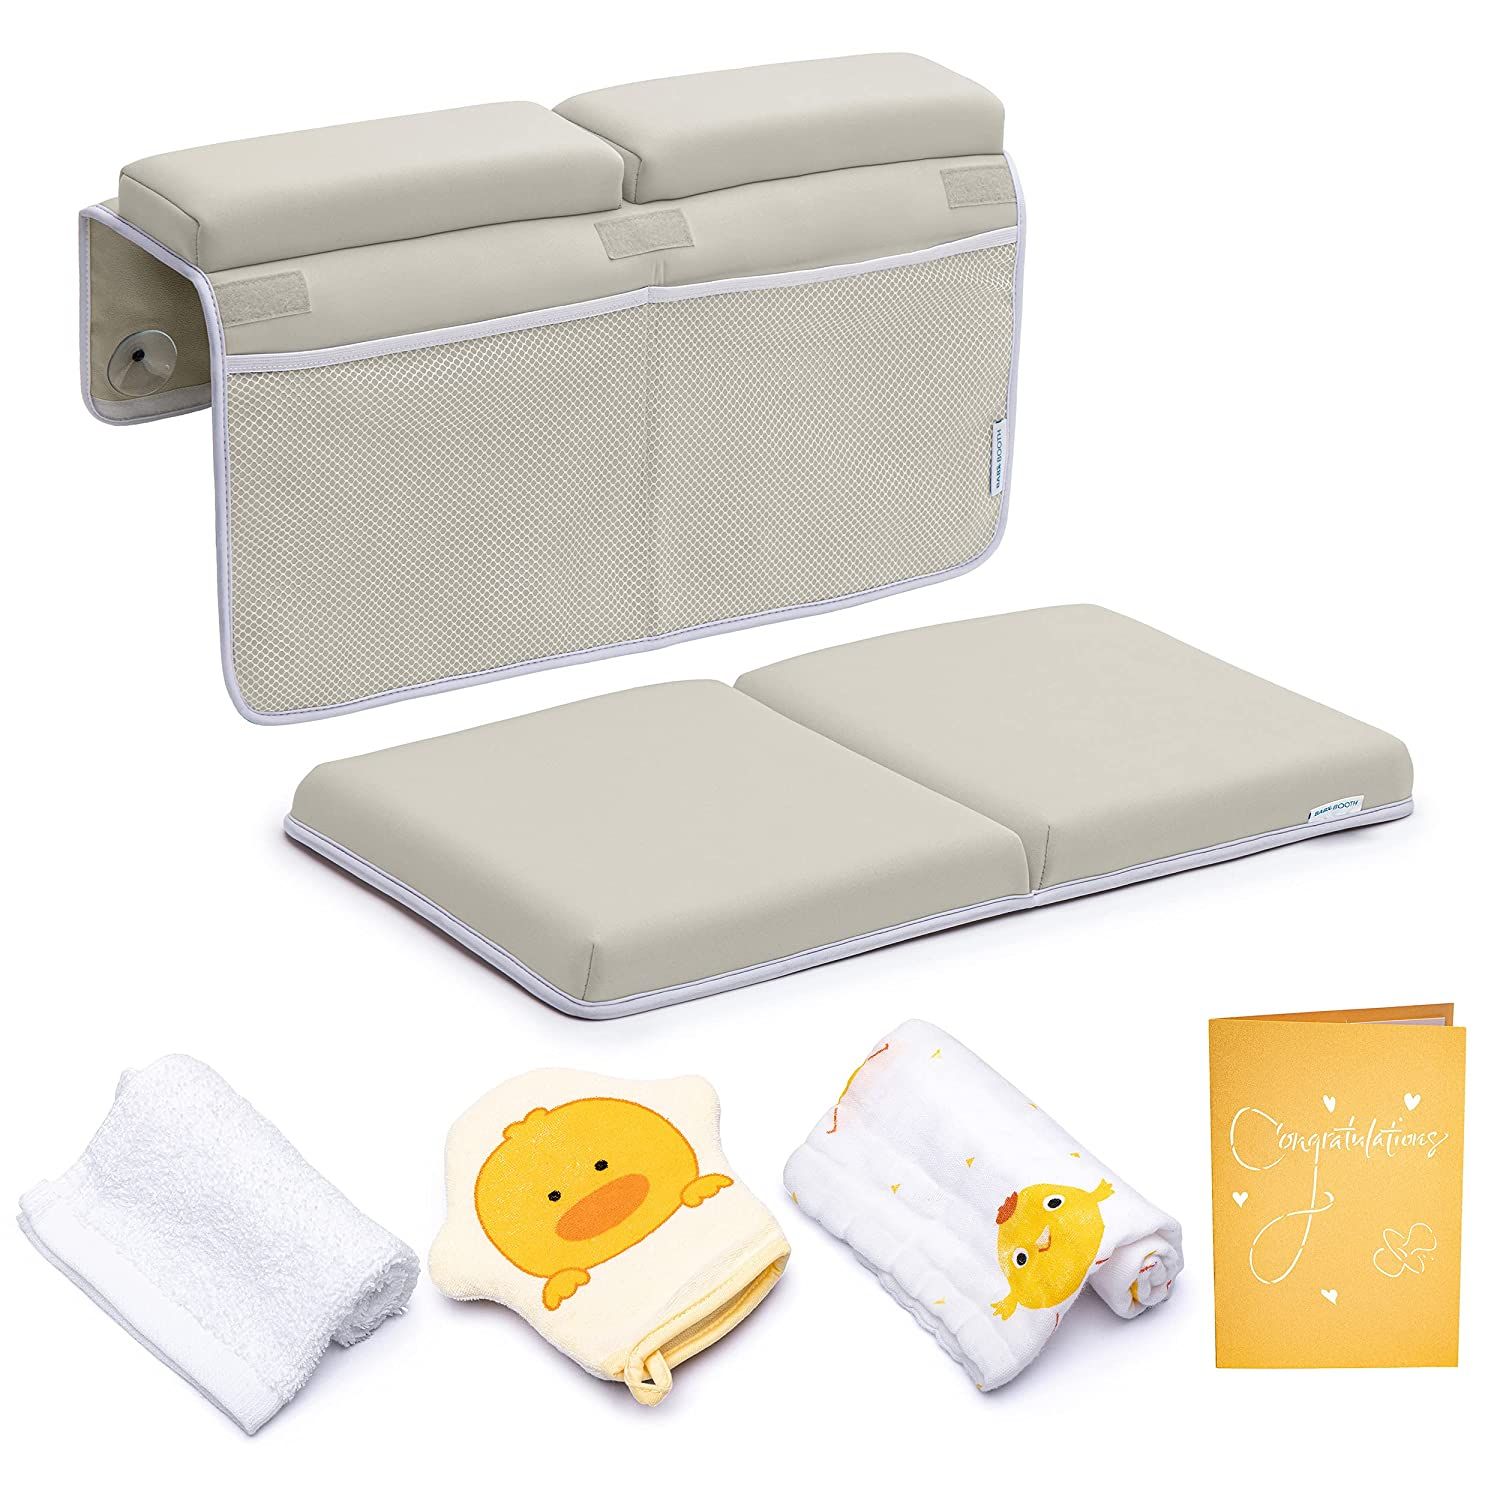 Bath Kneeler with Elbow Rest Pad Set, 1.75 inch Thick Kneeling Pad and Elbow Support for Knee Arm... | Amazon (US)